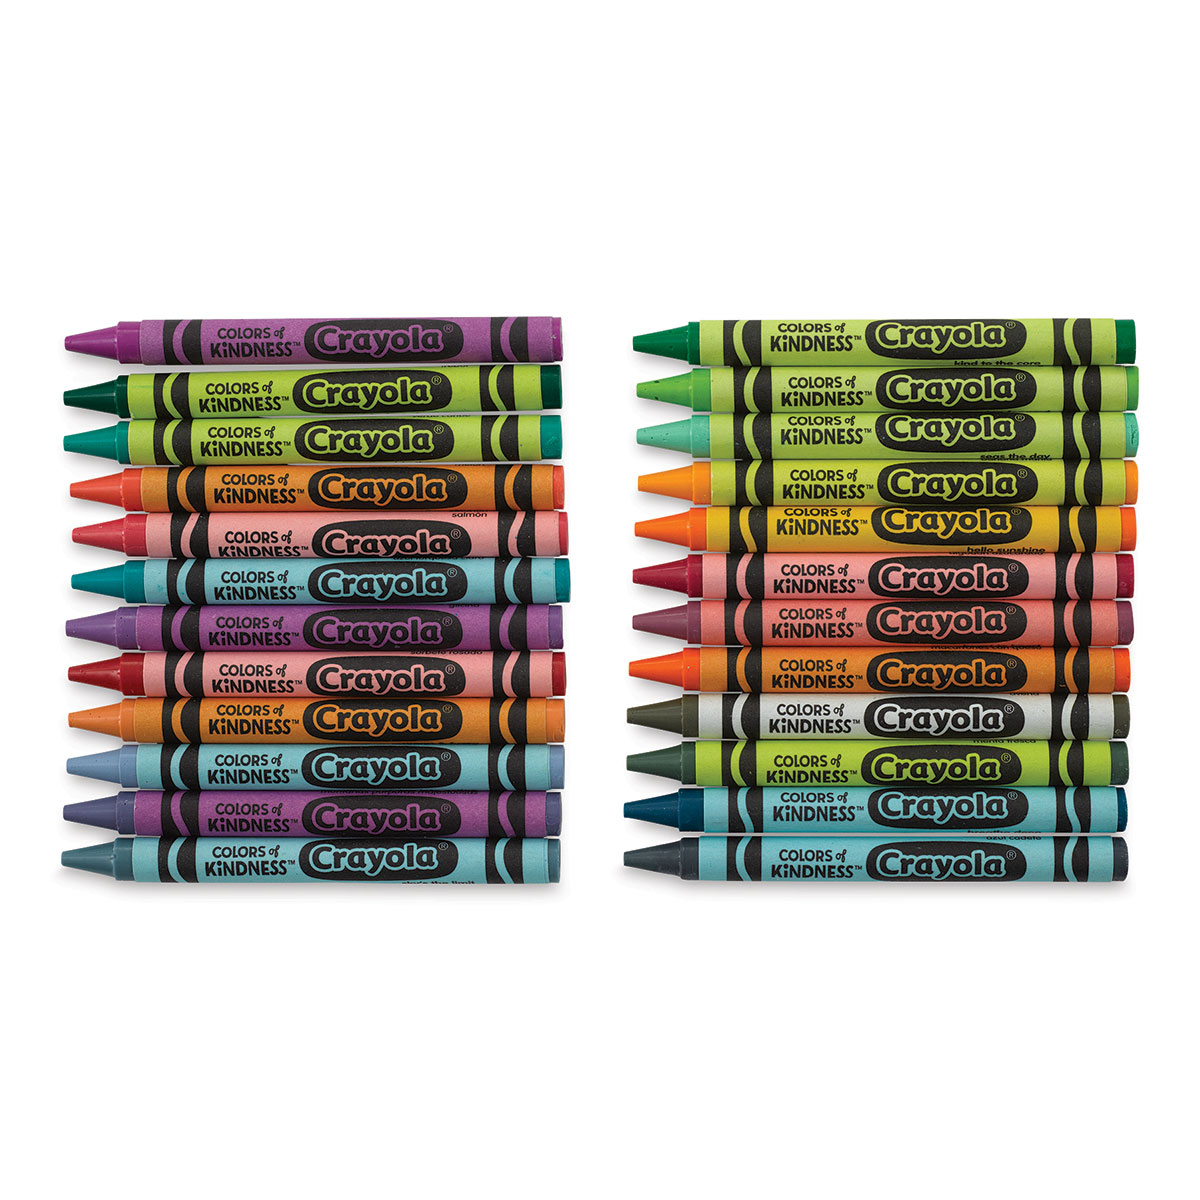 crayola colors of kindness crayons 24 colors – A Paper Hat